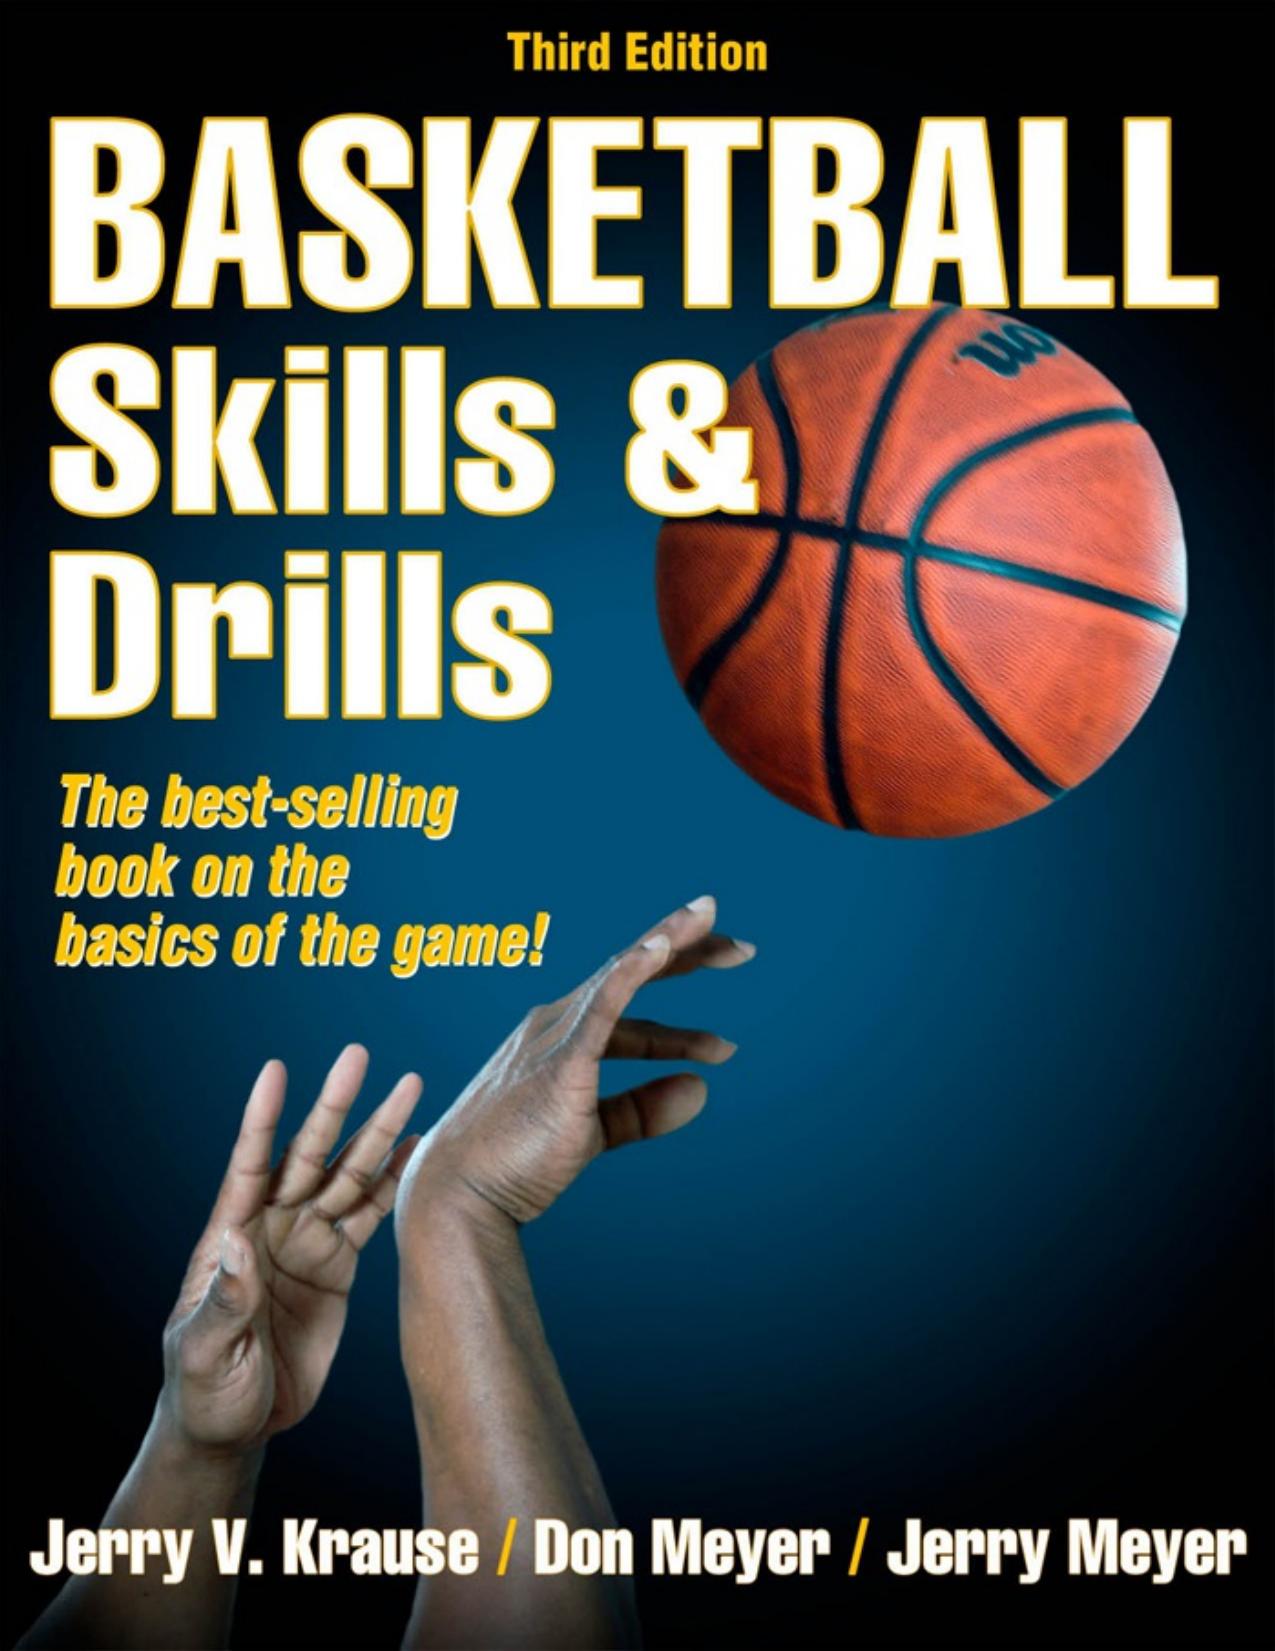 Basketball Skills & Drills by Jerry Krause